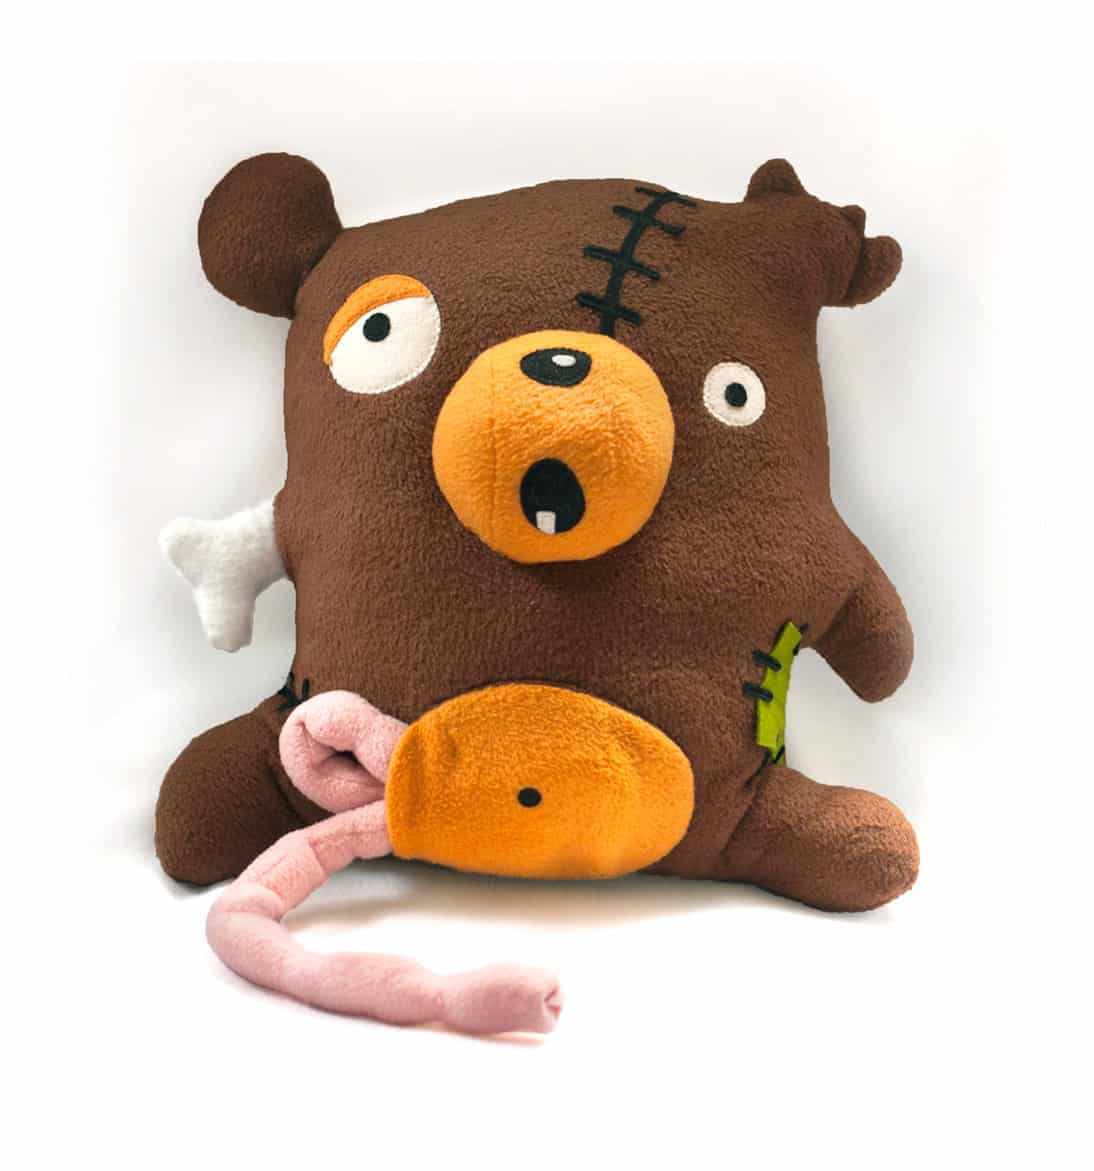 You can buy theZombie Bear Sewing Pattern here